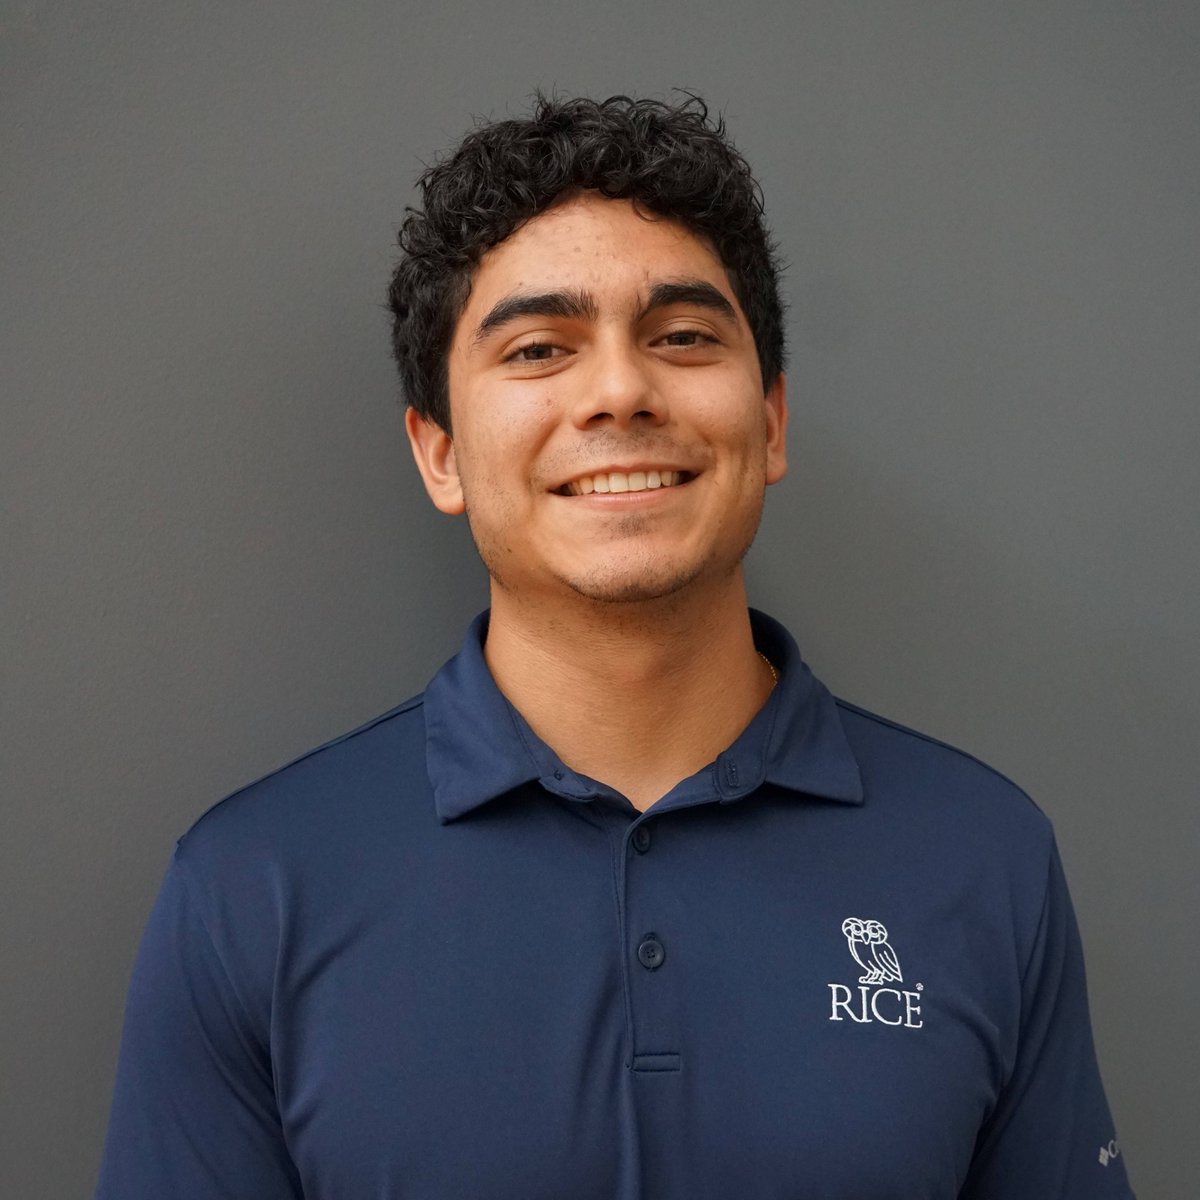 We celebrate JJ Tellez, who is graduating from @Rice_BIOE with a minor in GLHT. He made impressive contributions to several Rice360 projects, including ScarStretch and a life-saving Nasogastric Tube Suctioning Device for Neonates. Congrats, JJ! 🎓